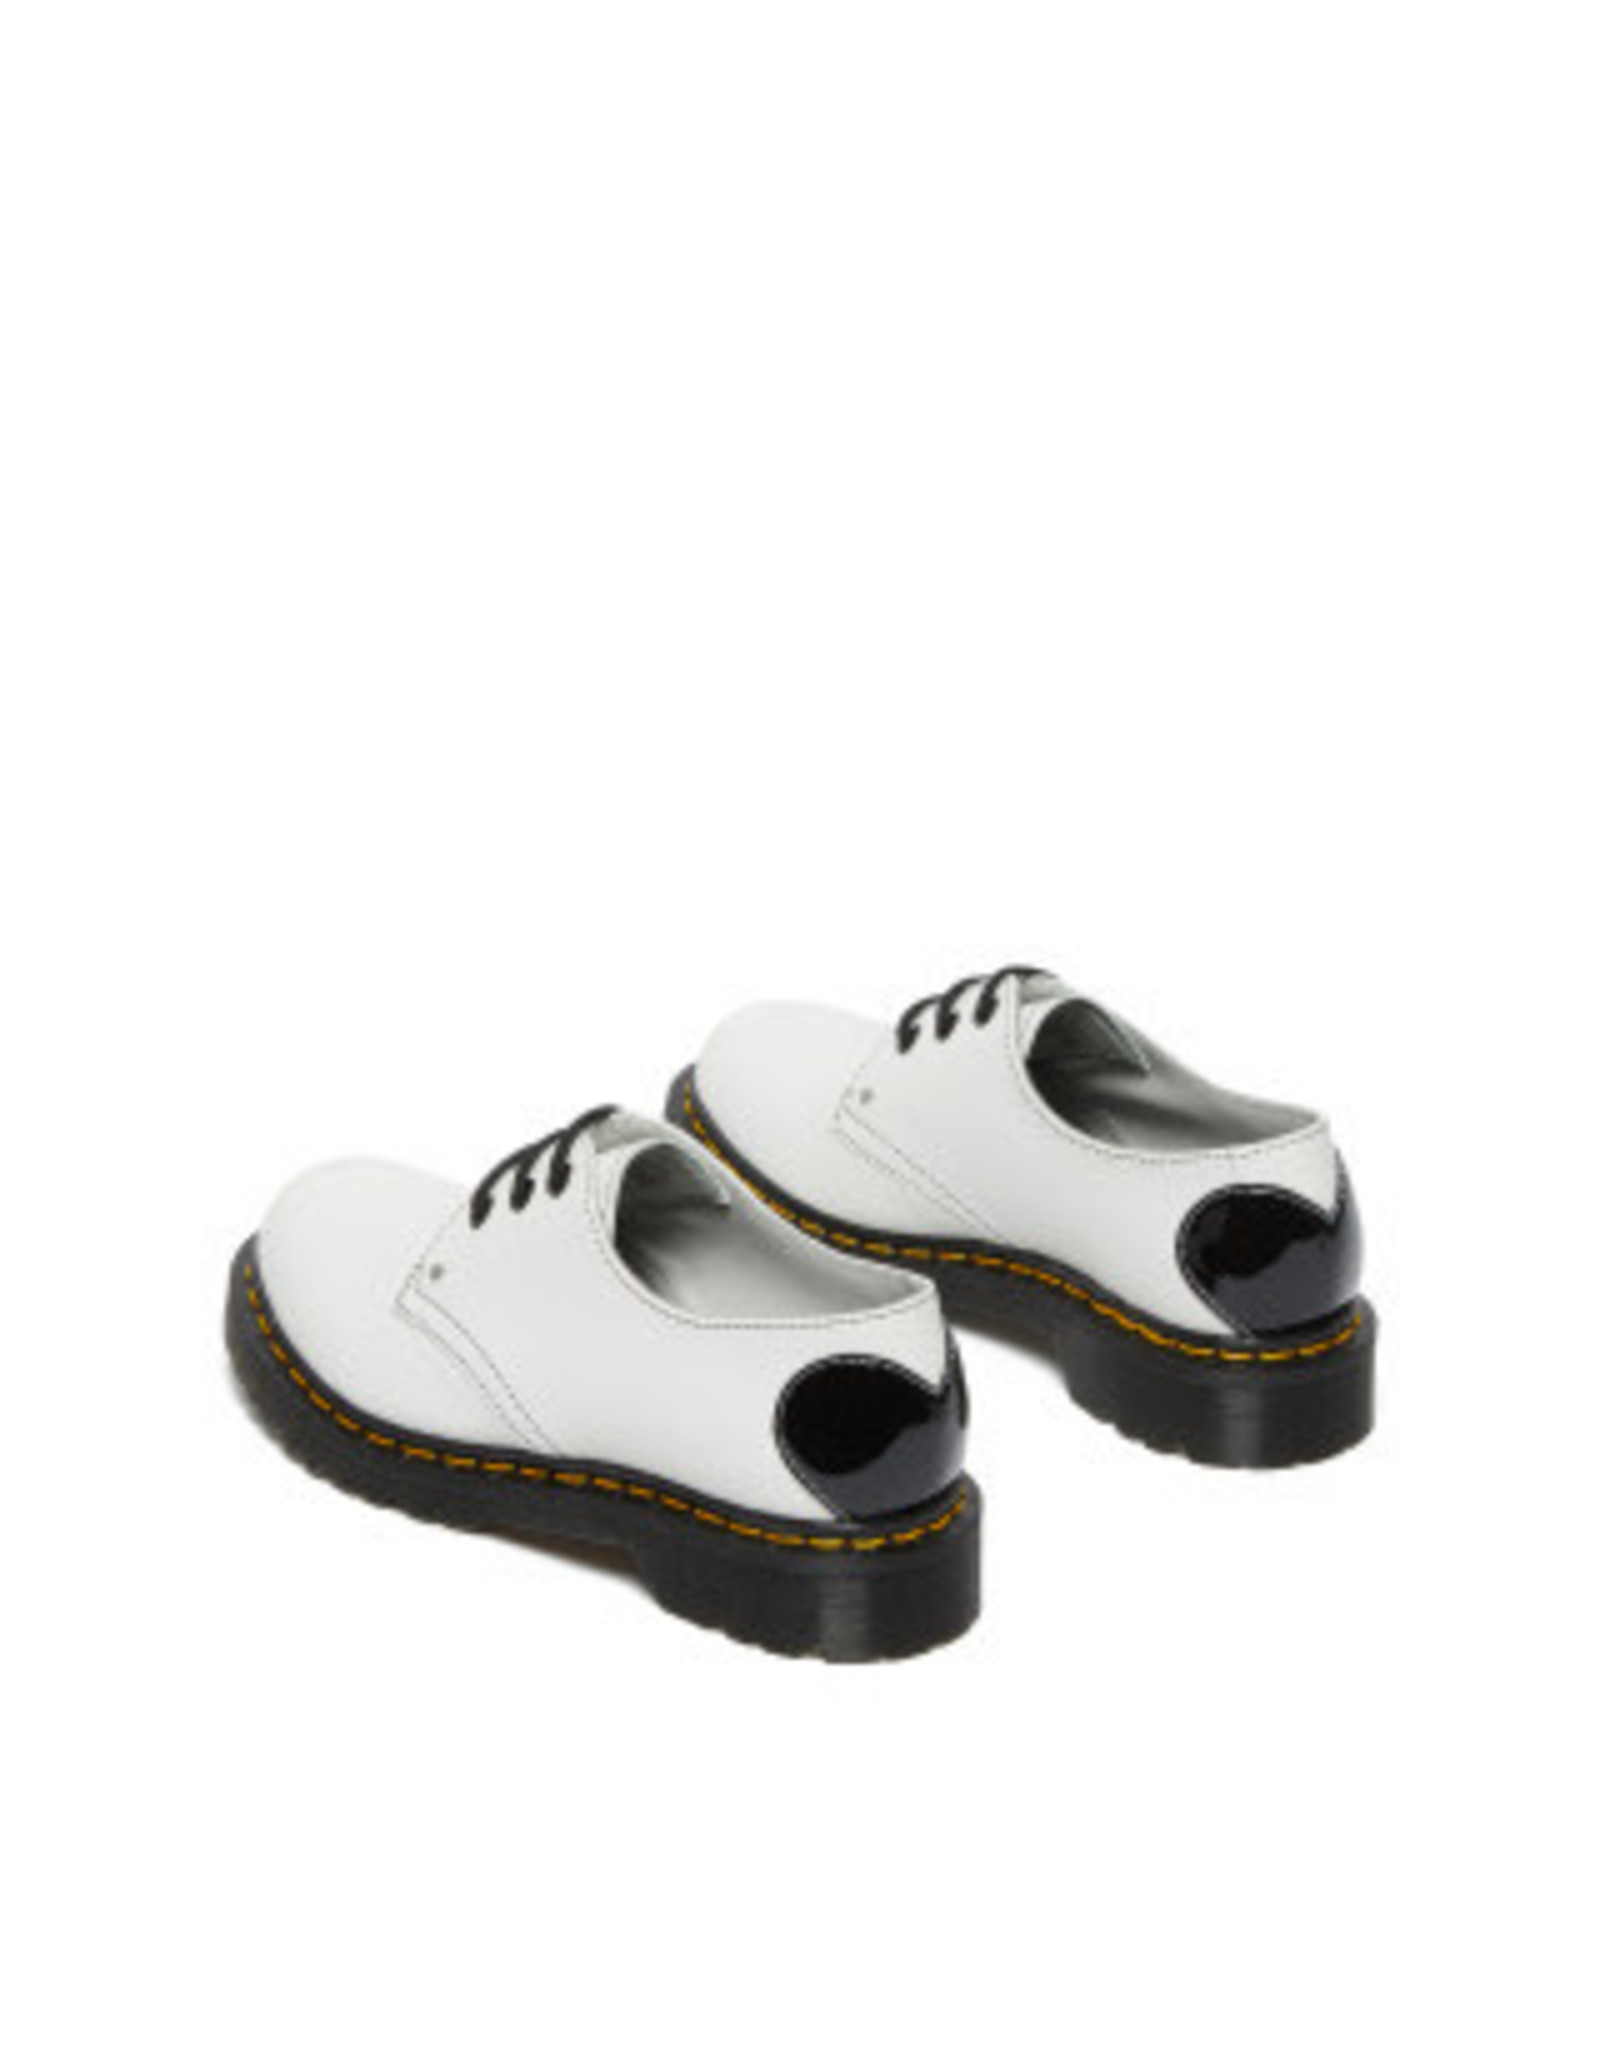 DR. MARTENS 1461 HEARTS WHITE & BLACK SMOOTH & PATENT LAMPER 301WH-R26682100